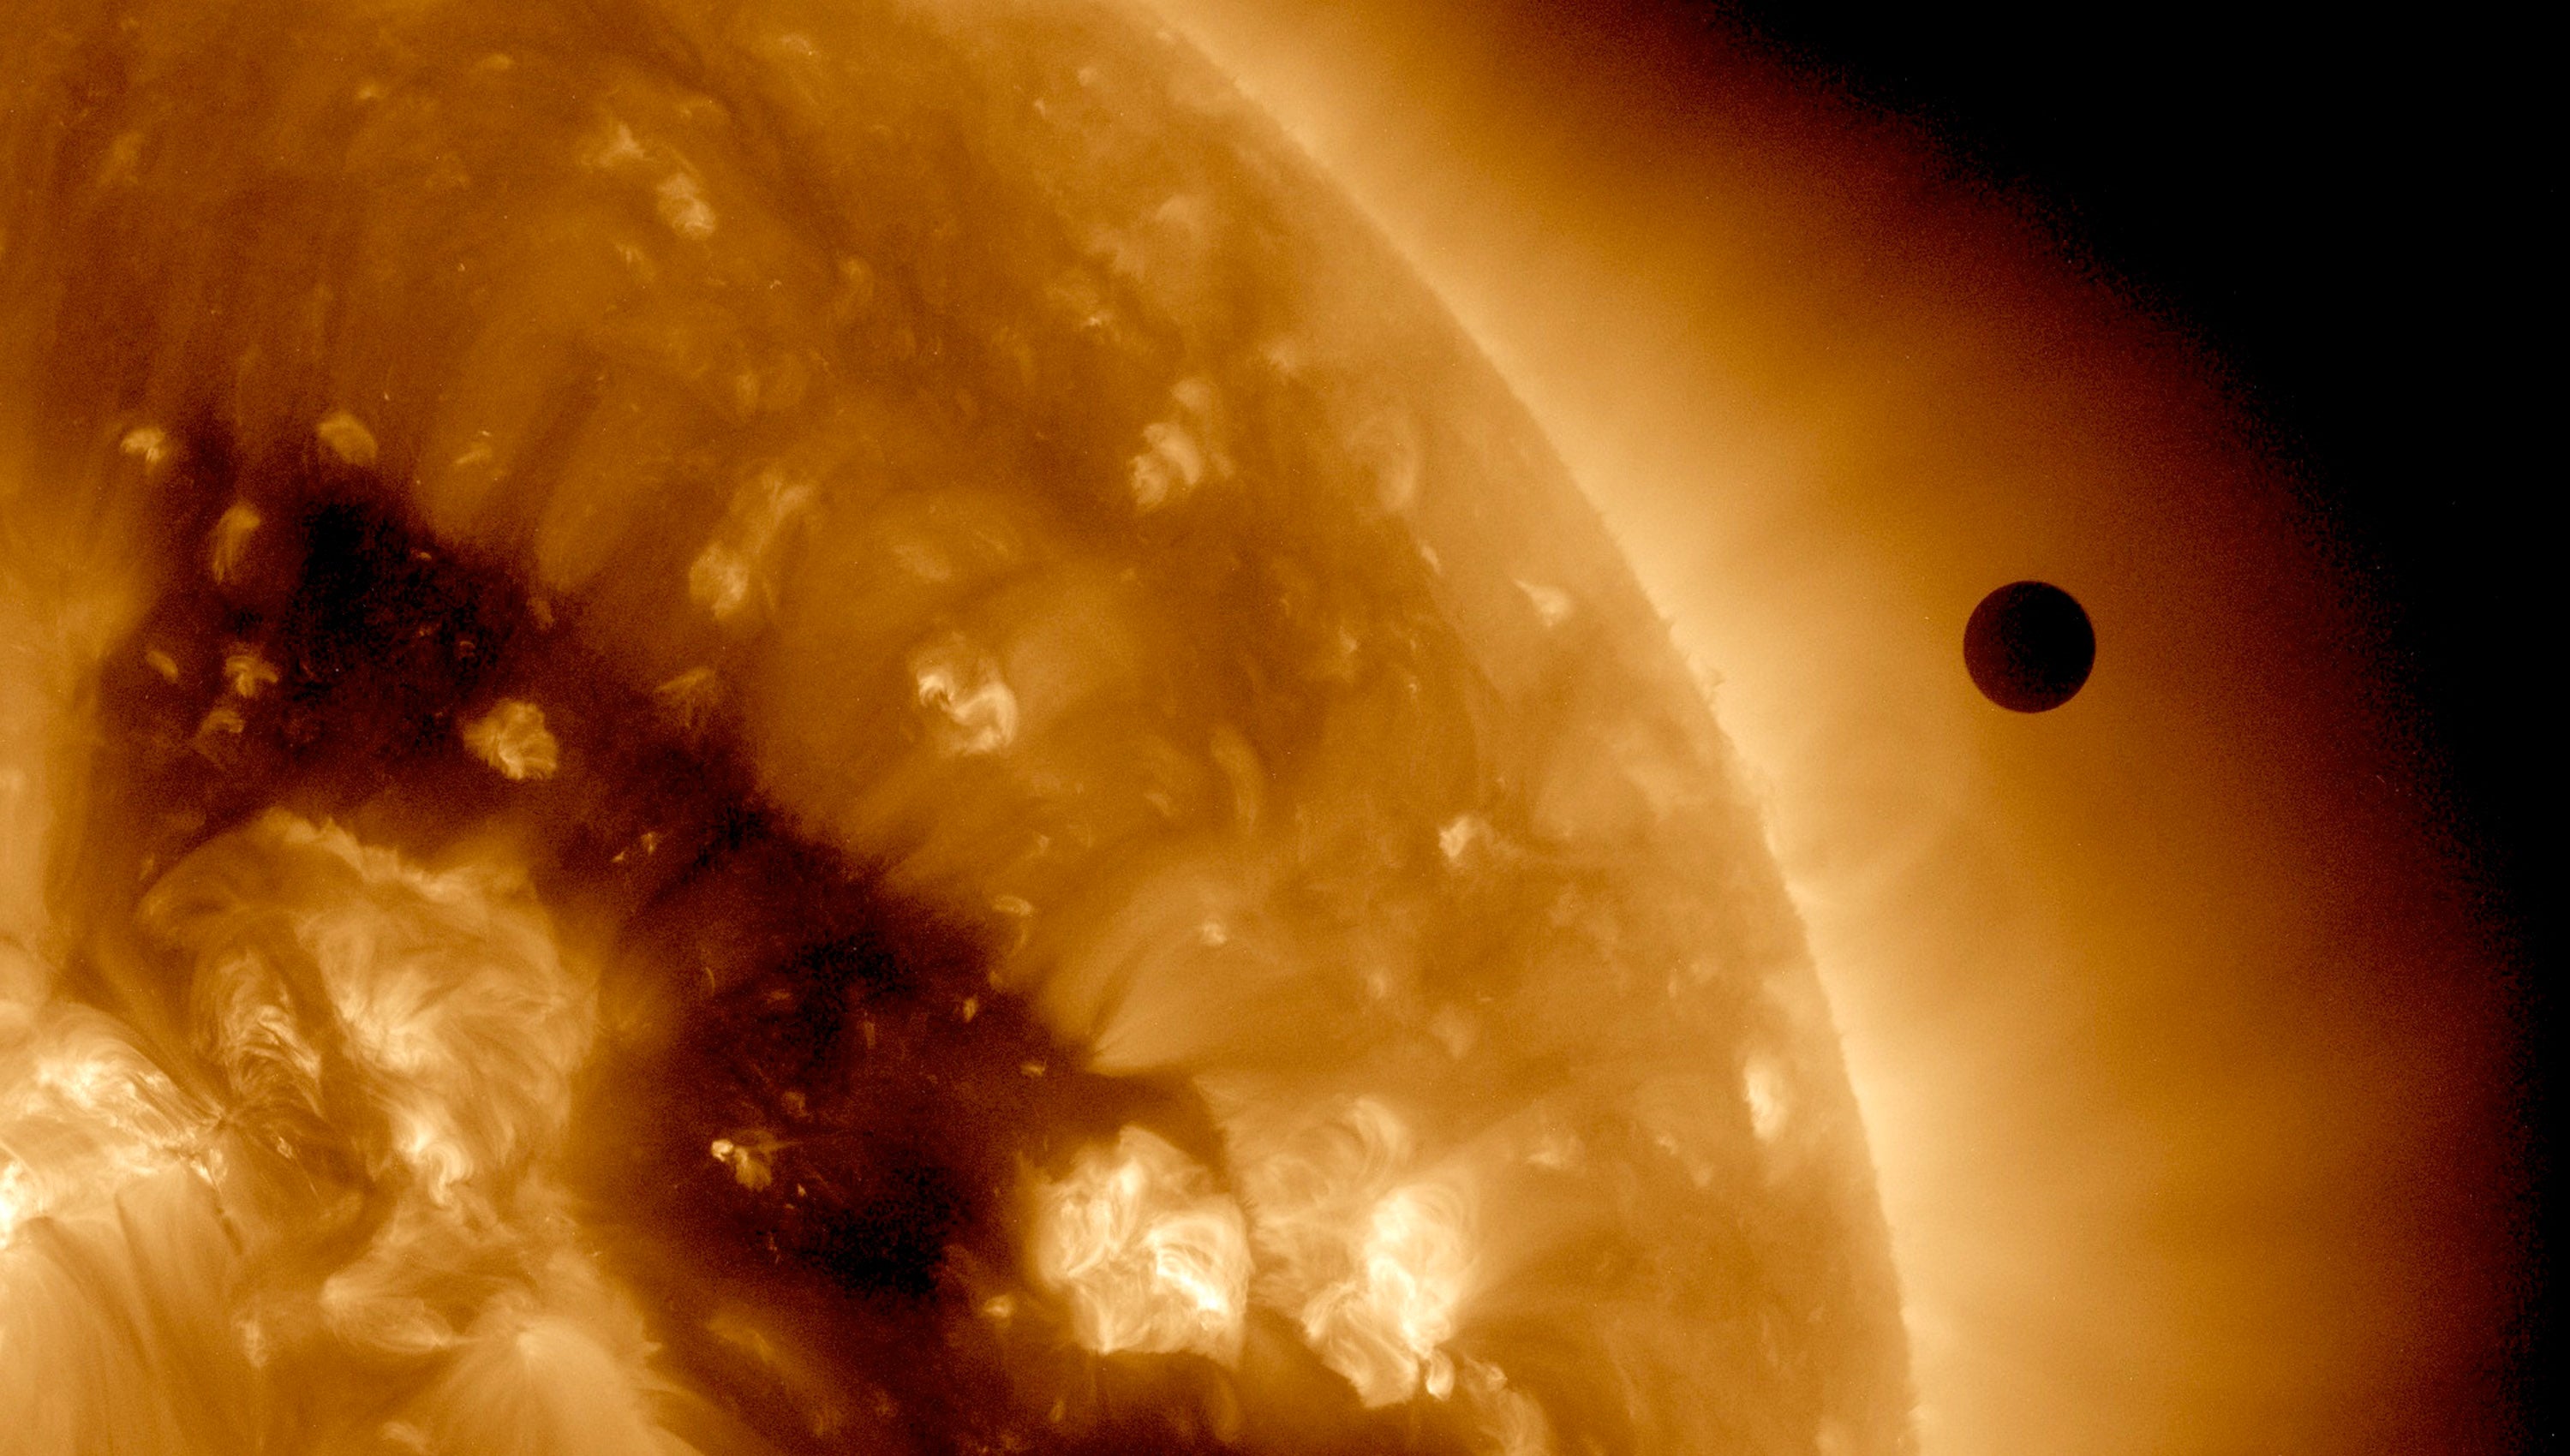 In this handout image provided by NASA, the SDO satellite captures a ultra-high definition image of the Transit of Venus across the face of the sun on June 6, 2012